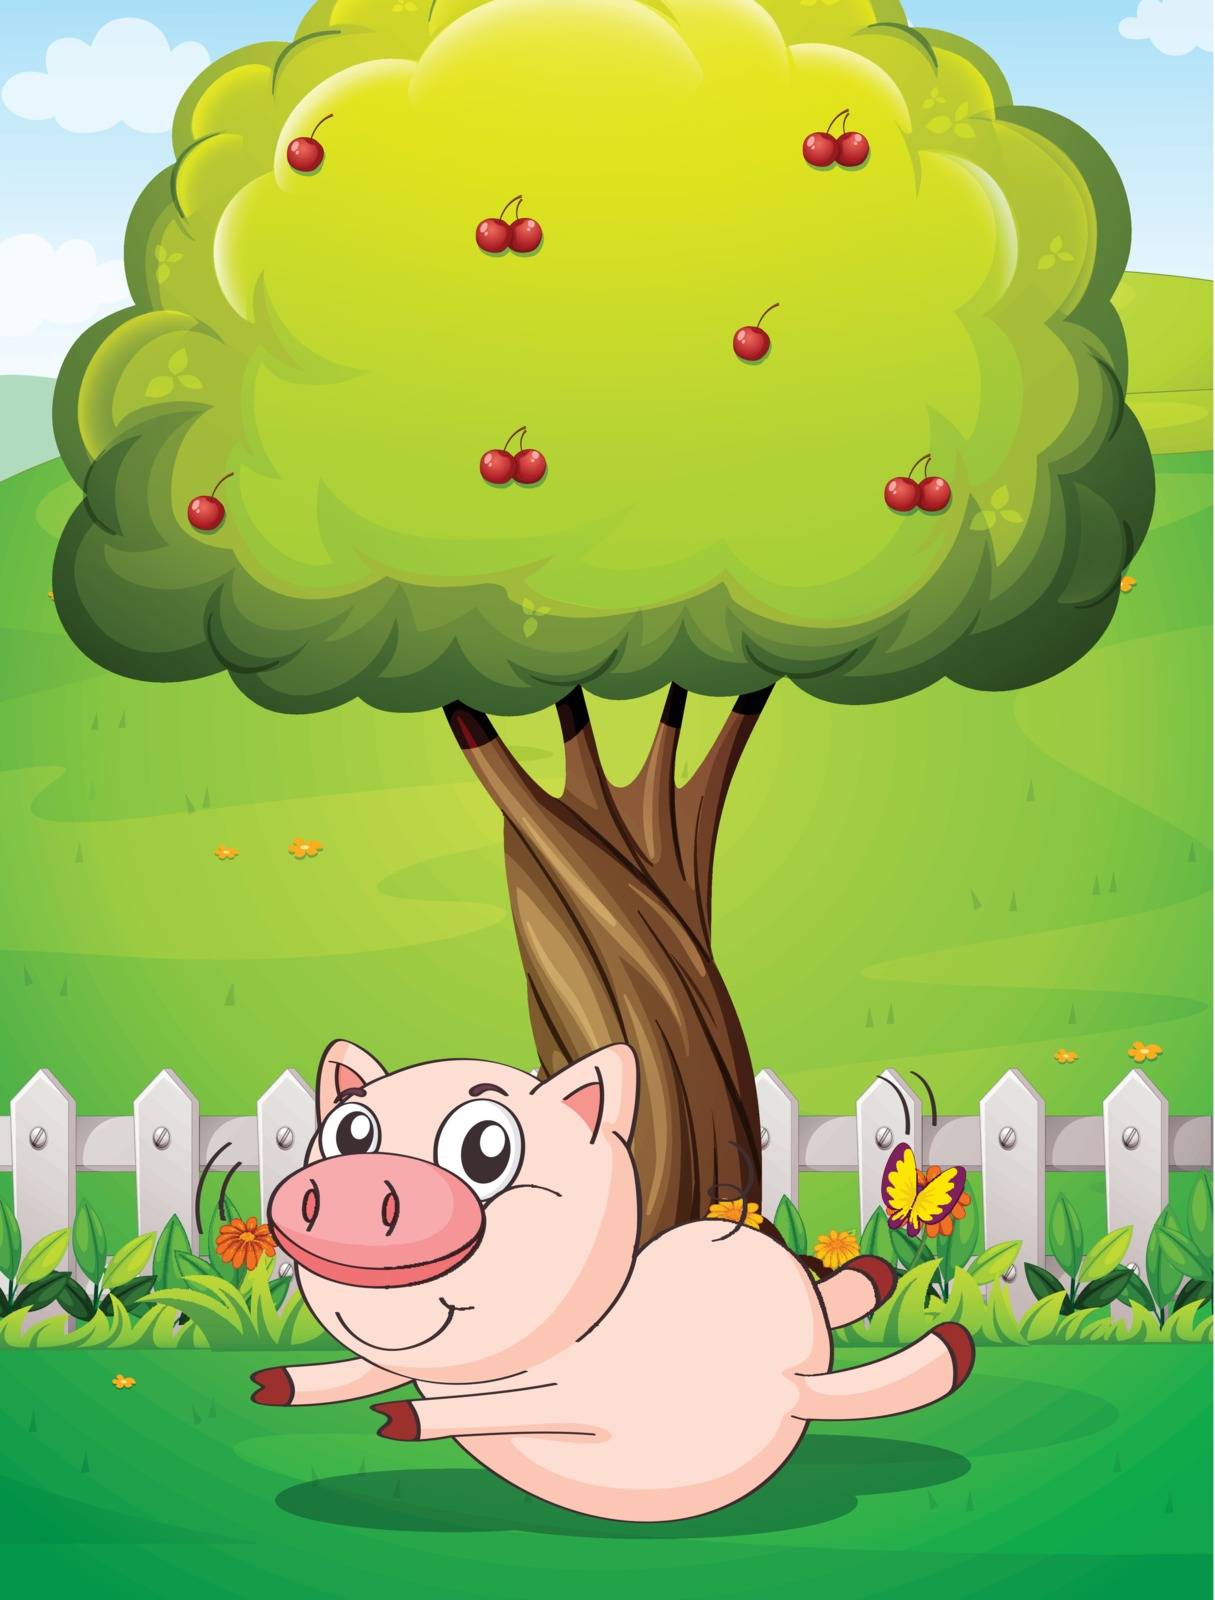 Illustration of a playful pig under the cherry tree